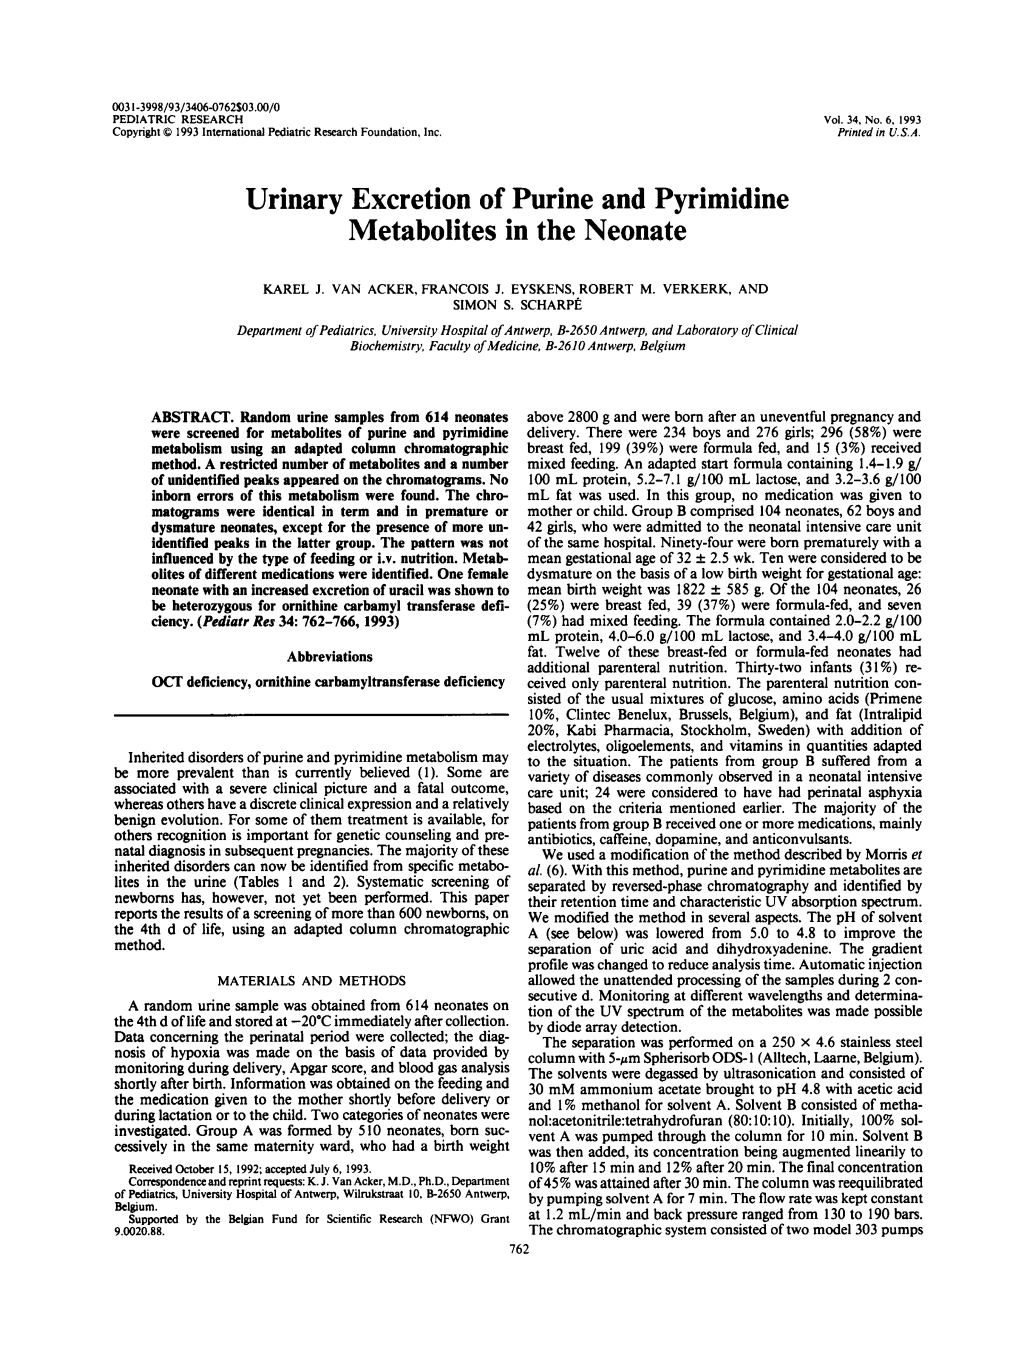 Urinary Excretion of Purine and Pyrimidine Metabolites in the Neonate